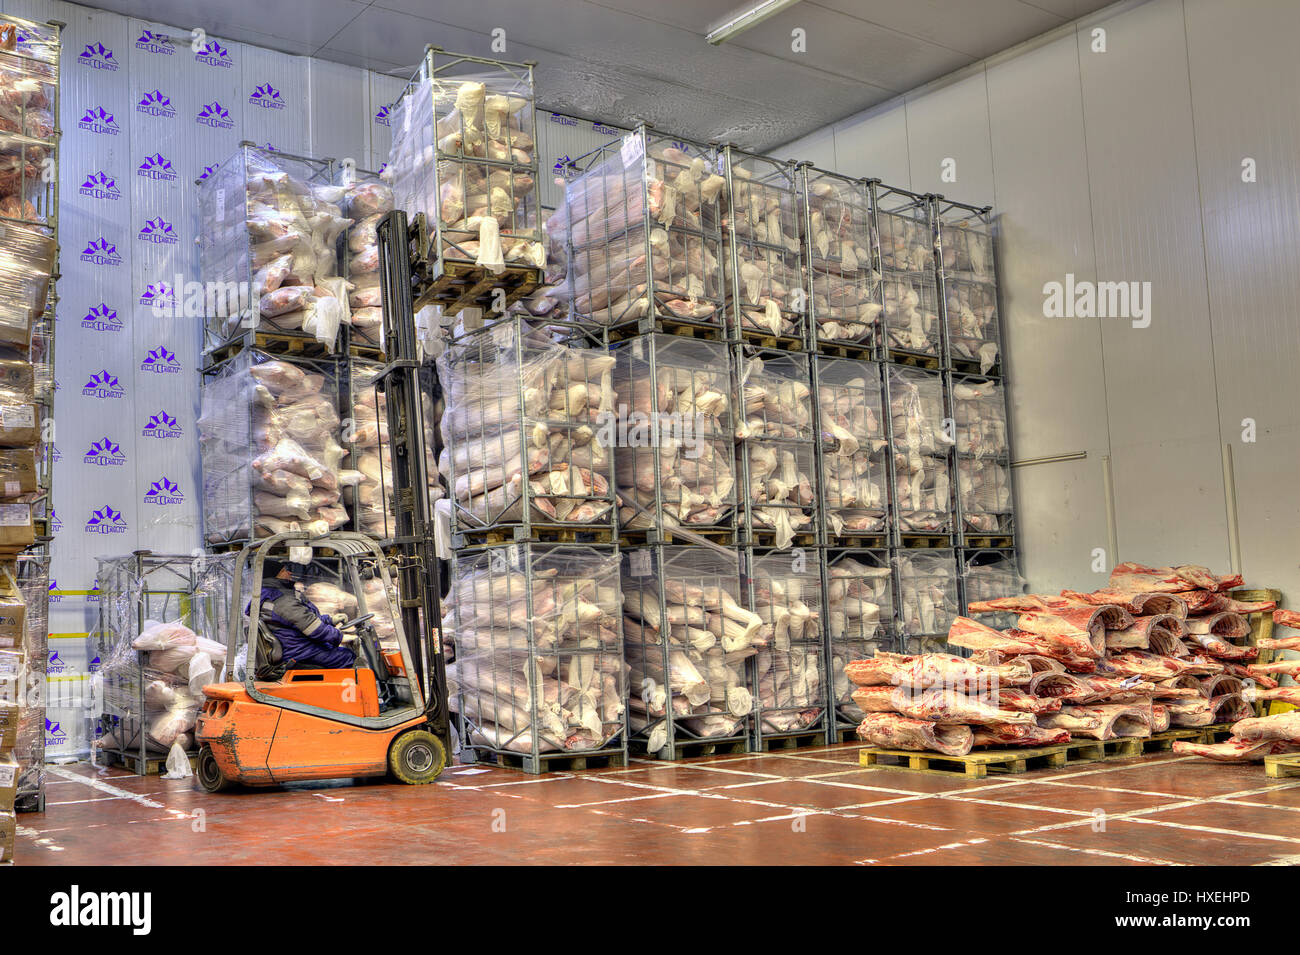 Saint-Petersburg, Russia - October 31, 2016: Forklift in Freezer, cold storage warehouse of meat products. Stock Photo